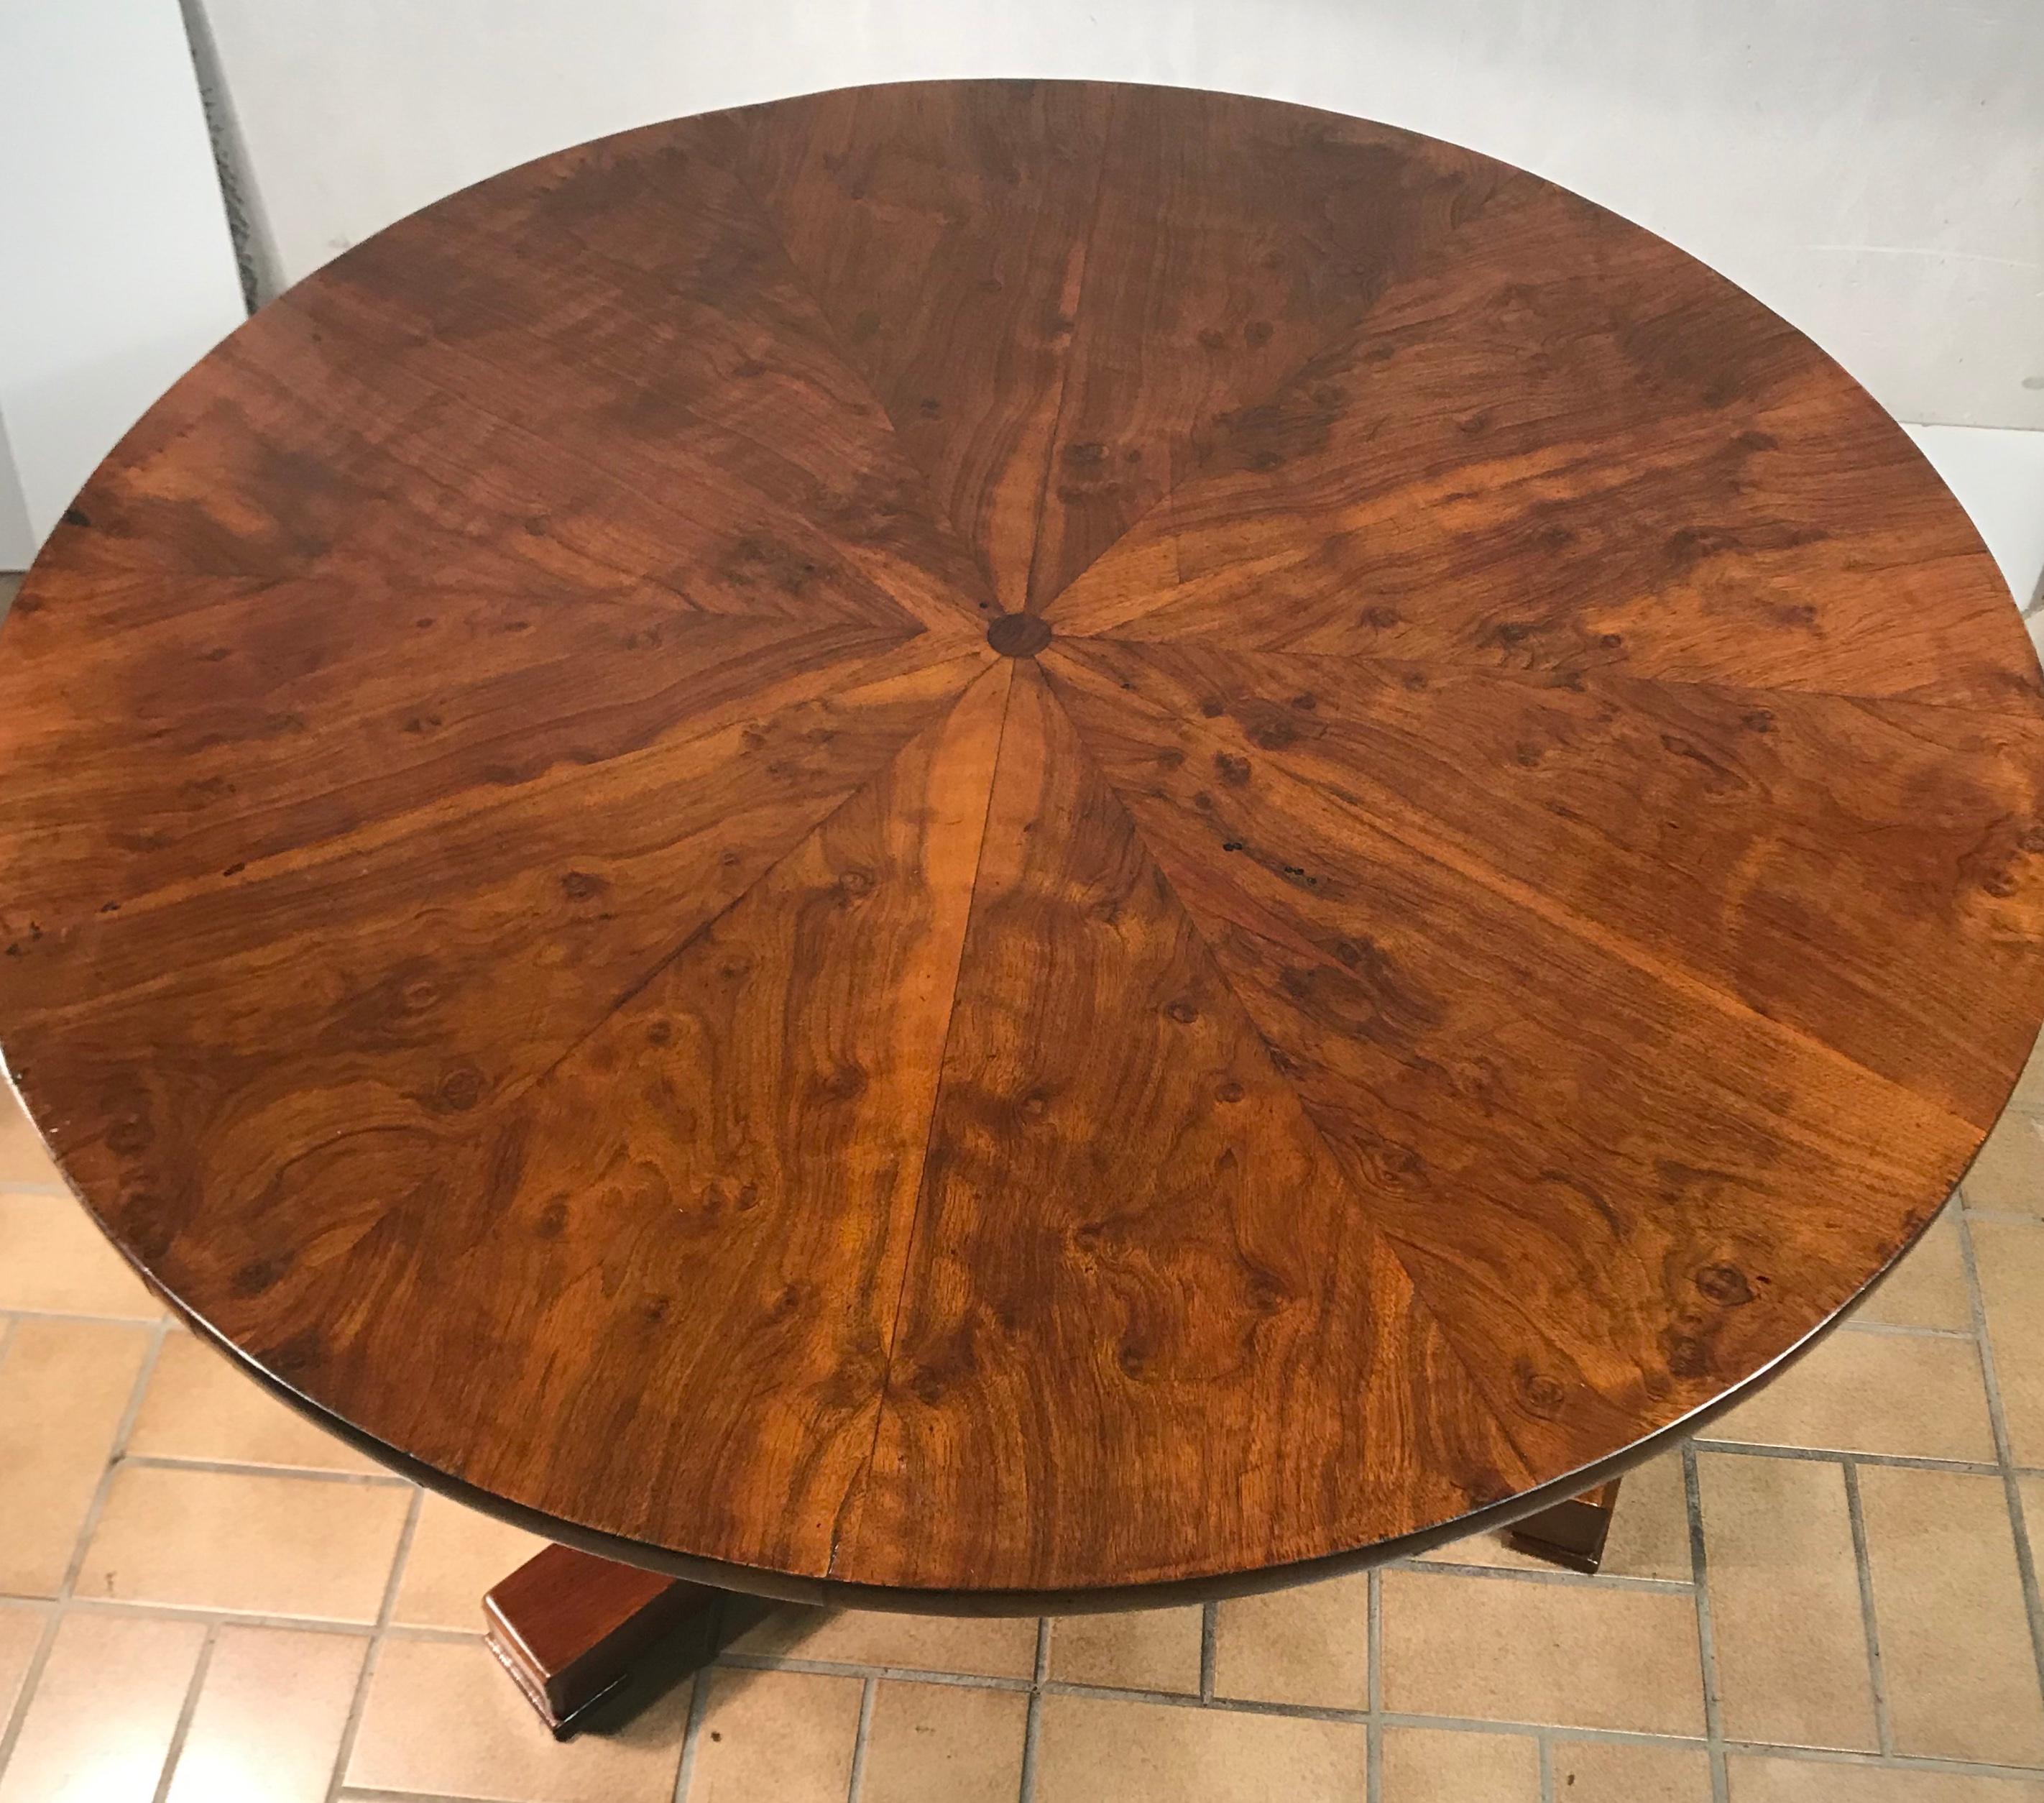 Original Biedermeier table, South German 1820
This beautiful original Biedermeier table has an exquisite walnut veneer on top and base. 
It is in good condition. It has been carefully refinished French polished. 
The top has some imperfections due